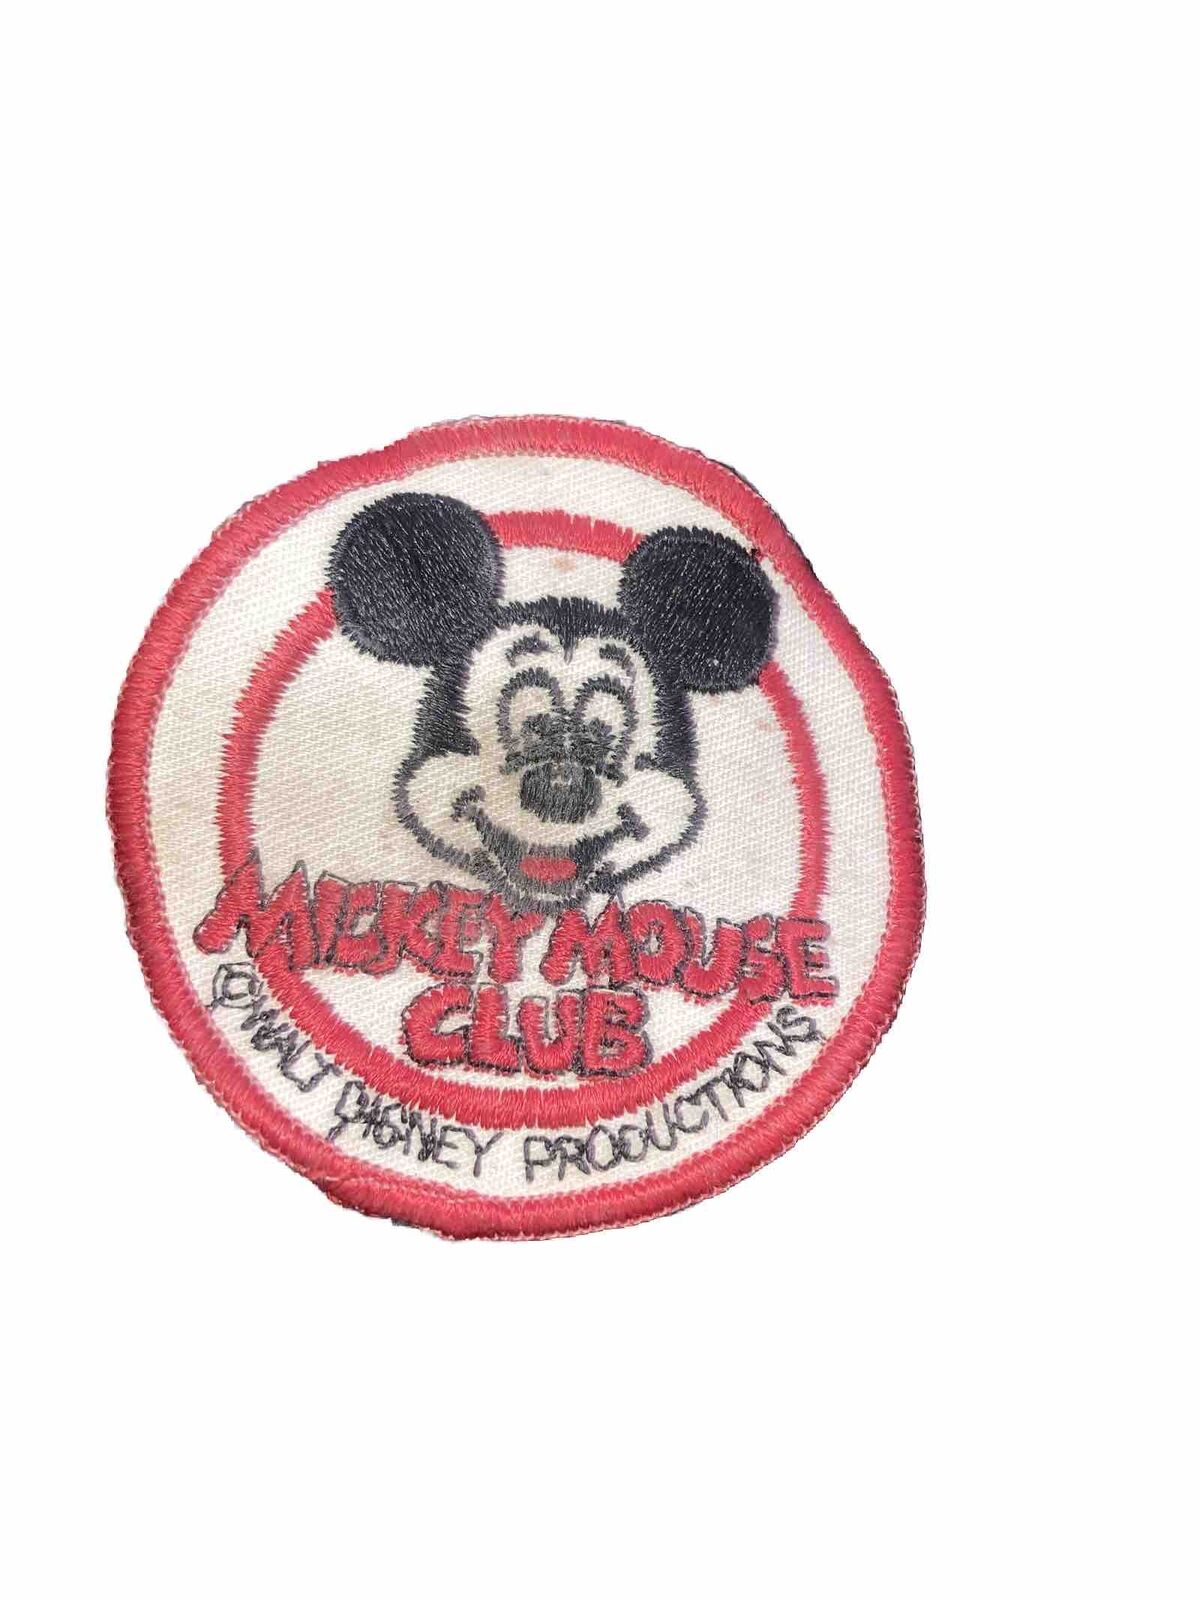 Vintage Walt Disney Mickey Mouse Club Embroidered Patch White Red Streamline